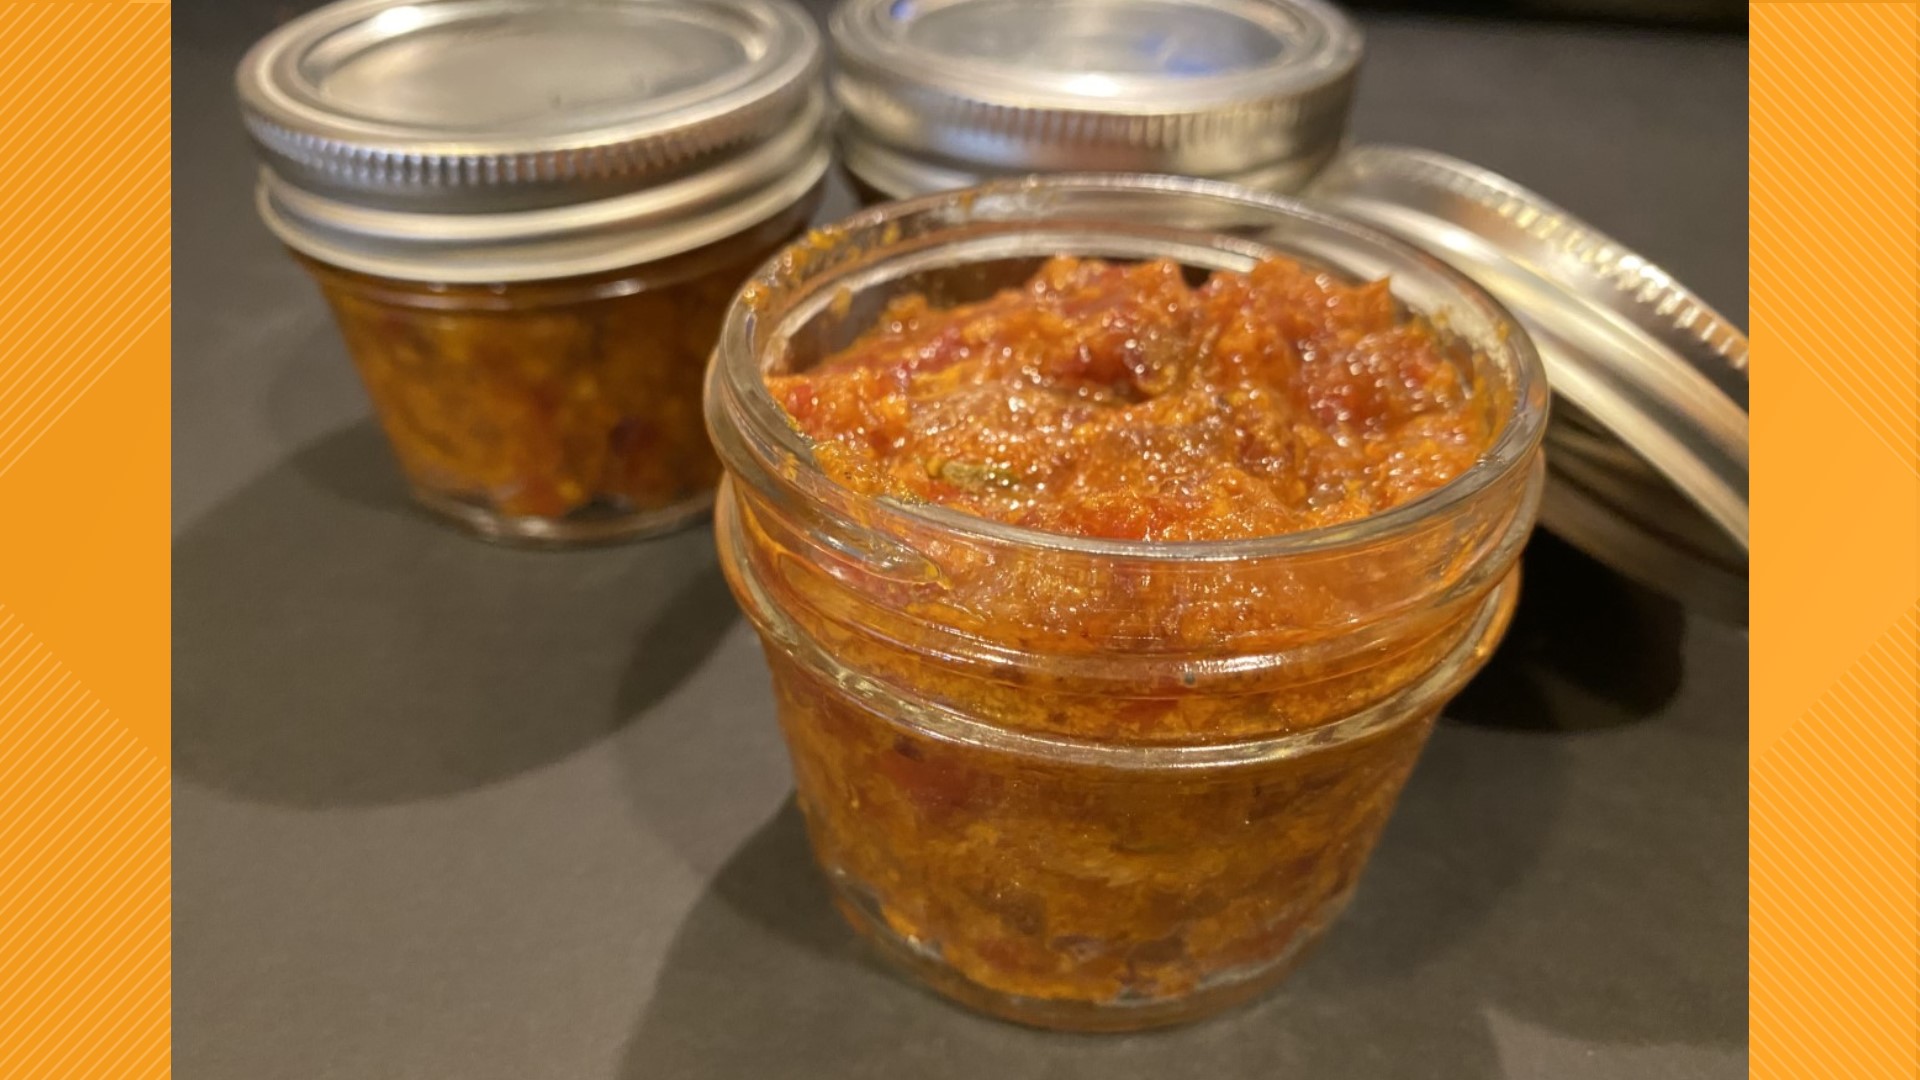 Bacon tomato jam is perfect for grilled cheeses.